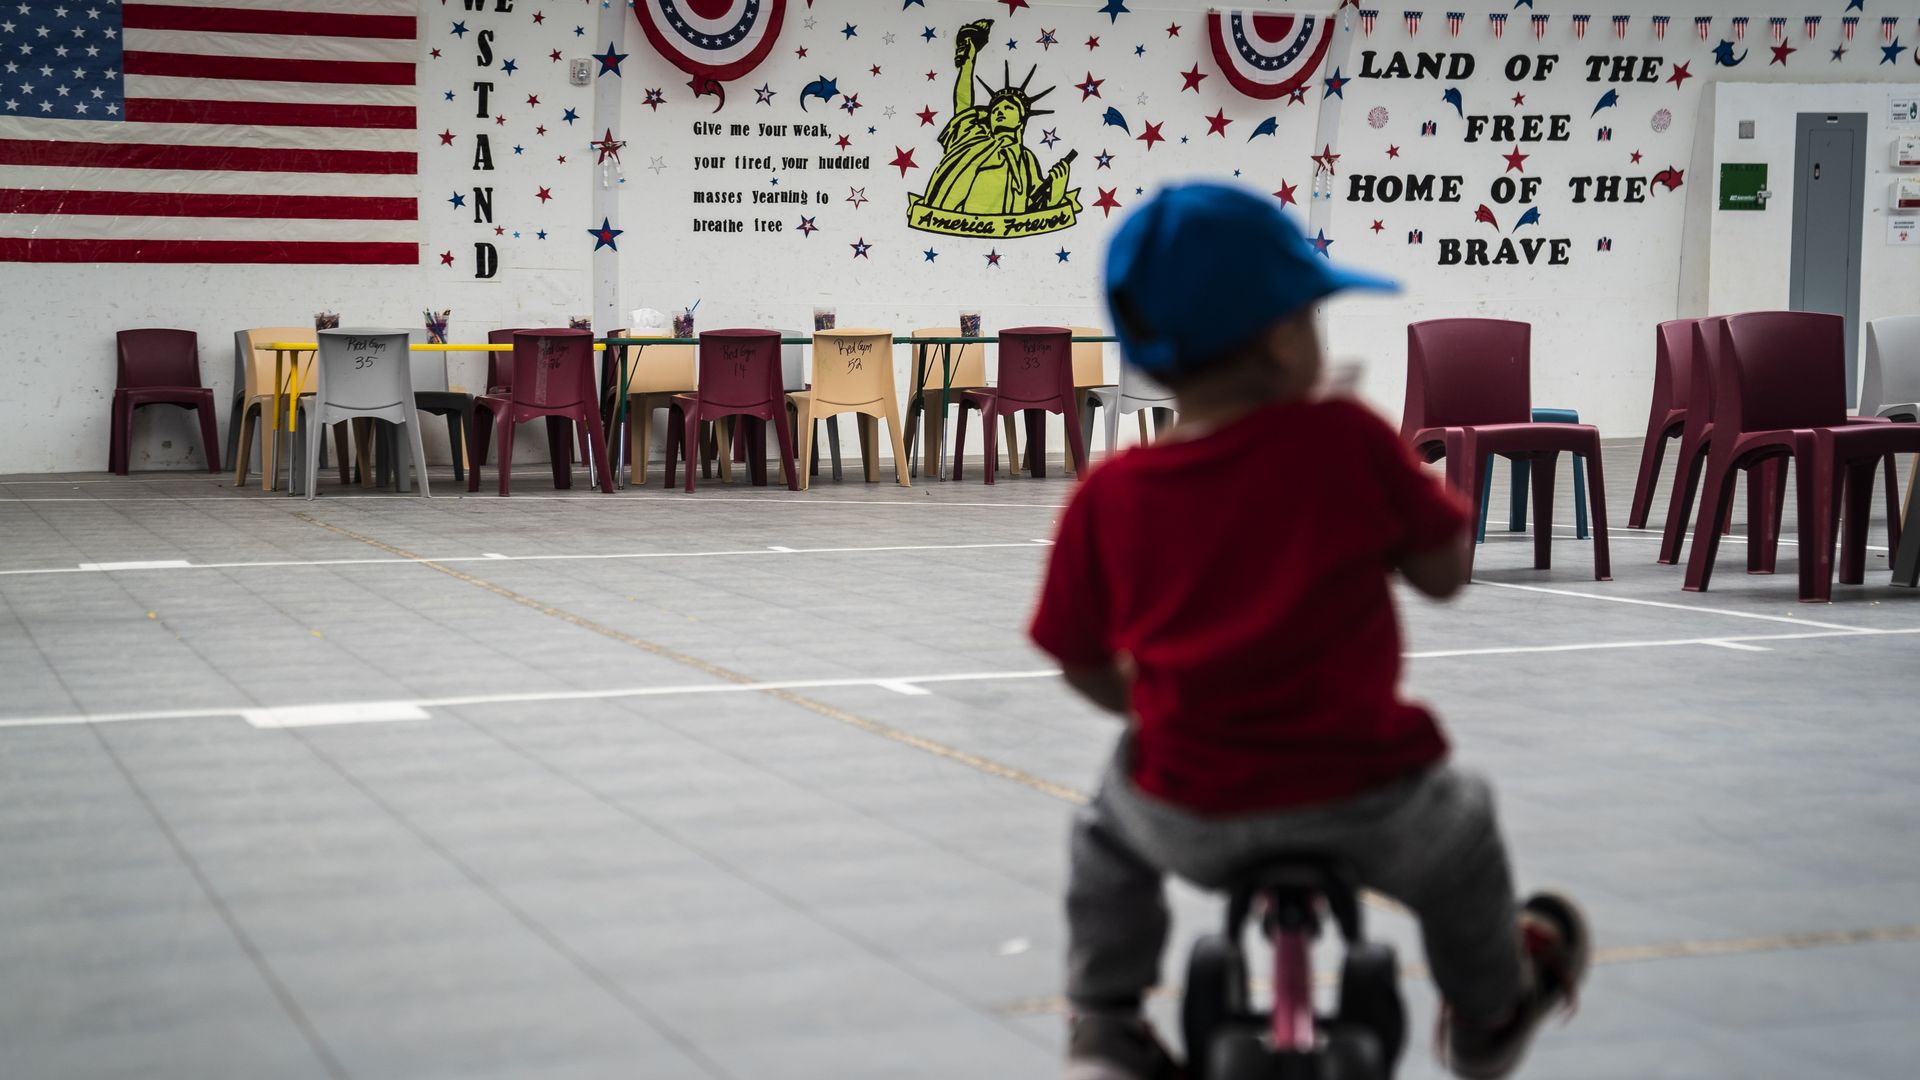 An immigrant child plays in front of patriotic phrases and symbols covering the walls in a gymnasium at U.S. Immigration and Customs Enforcement's South Texas Family Residential Center